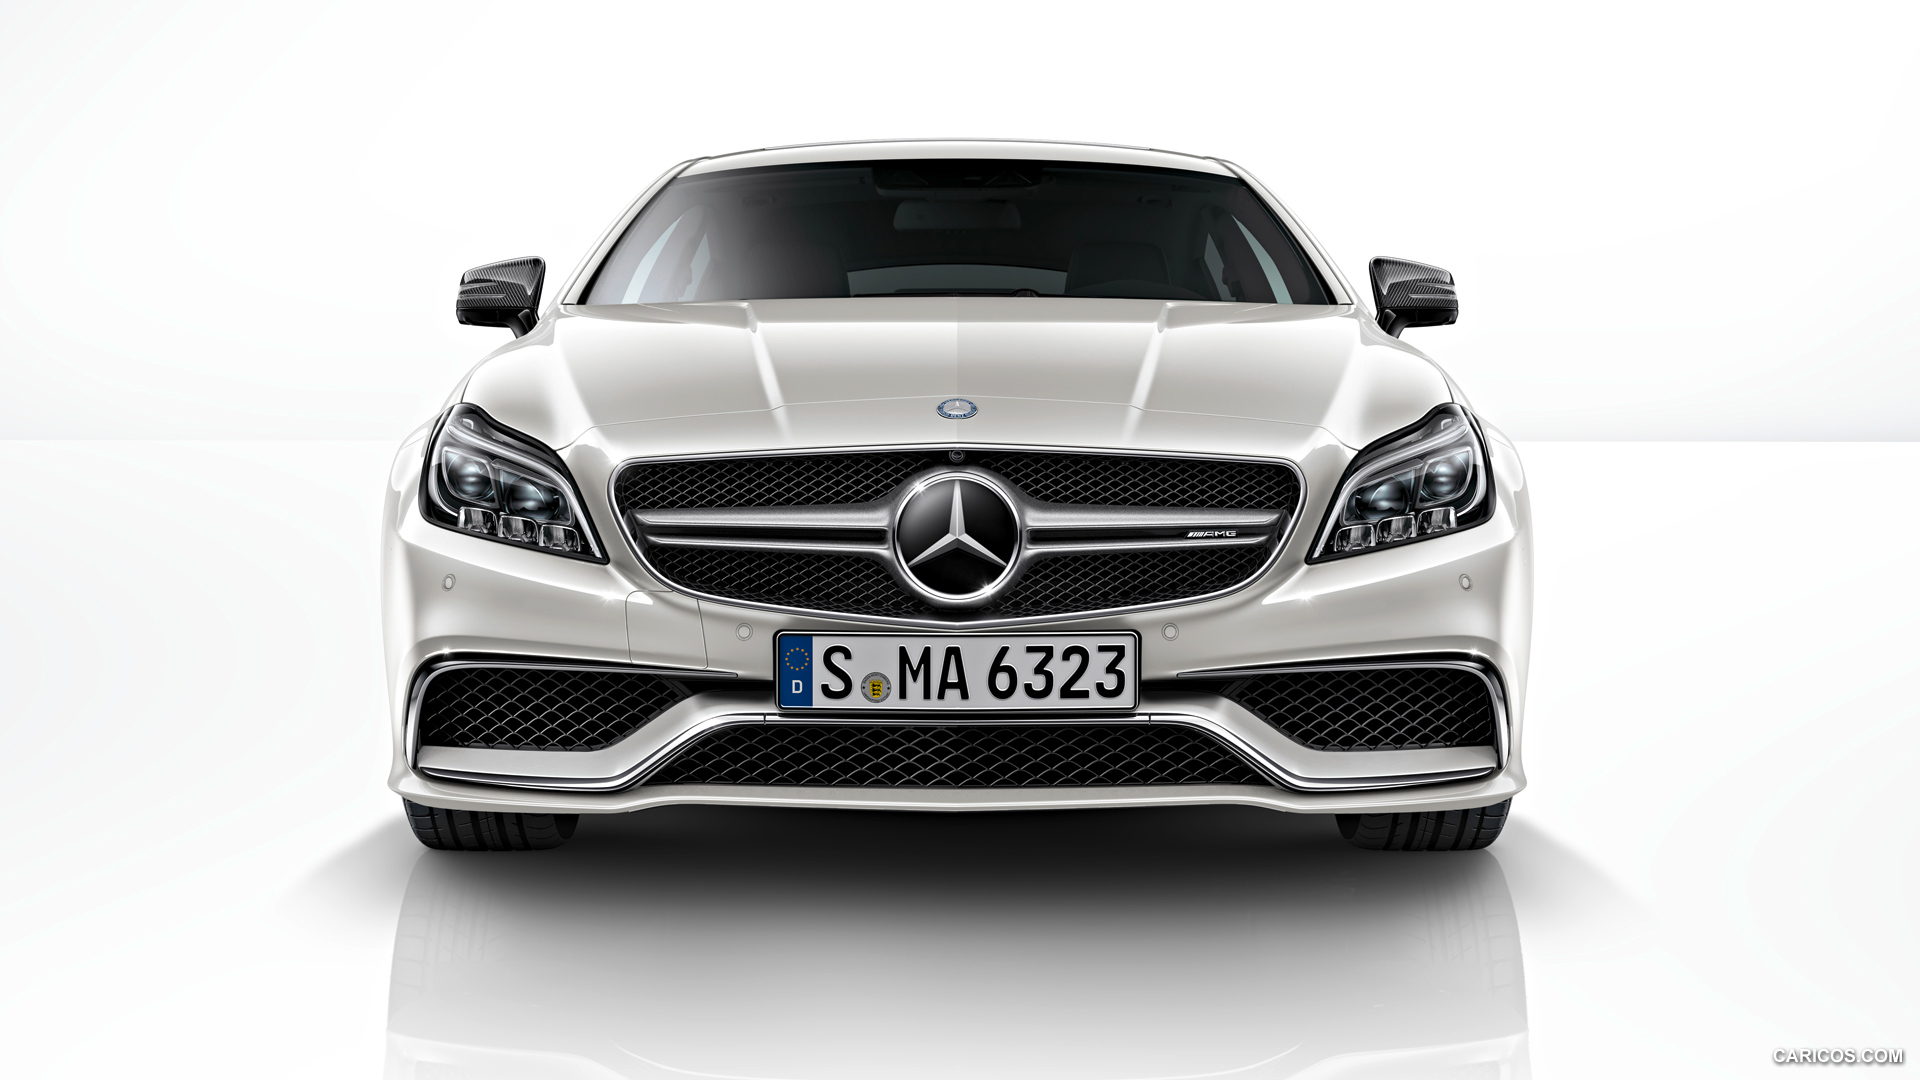 2015 Mercedes-Benz CLS 63 AMG Shooting Brake S-Model - Front, #44 of 52